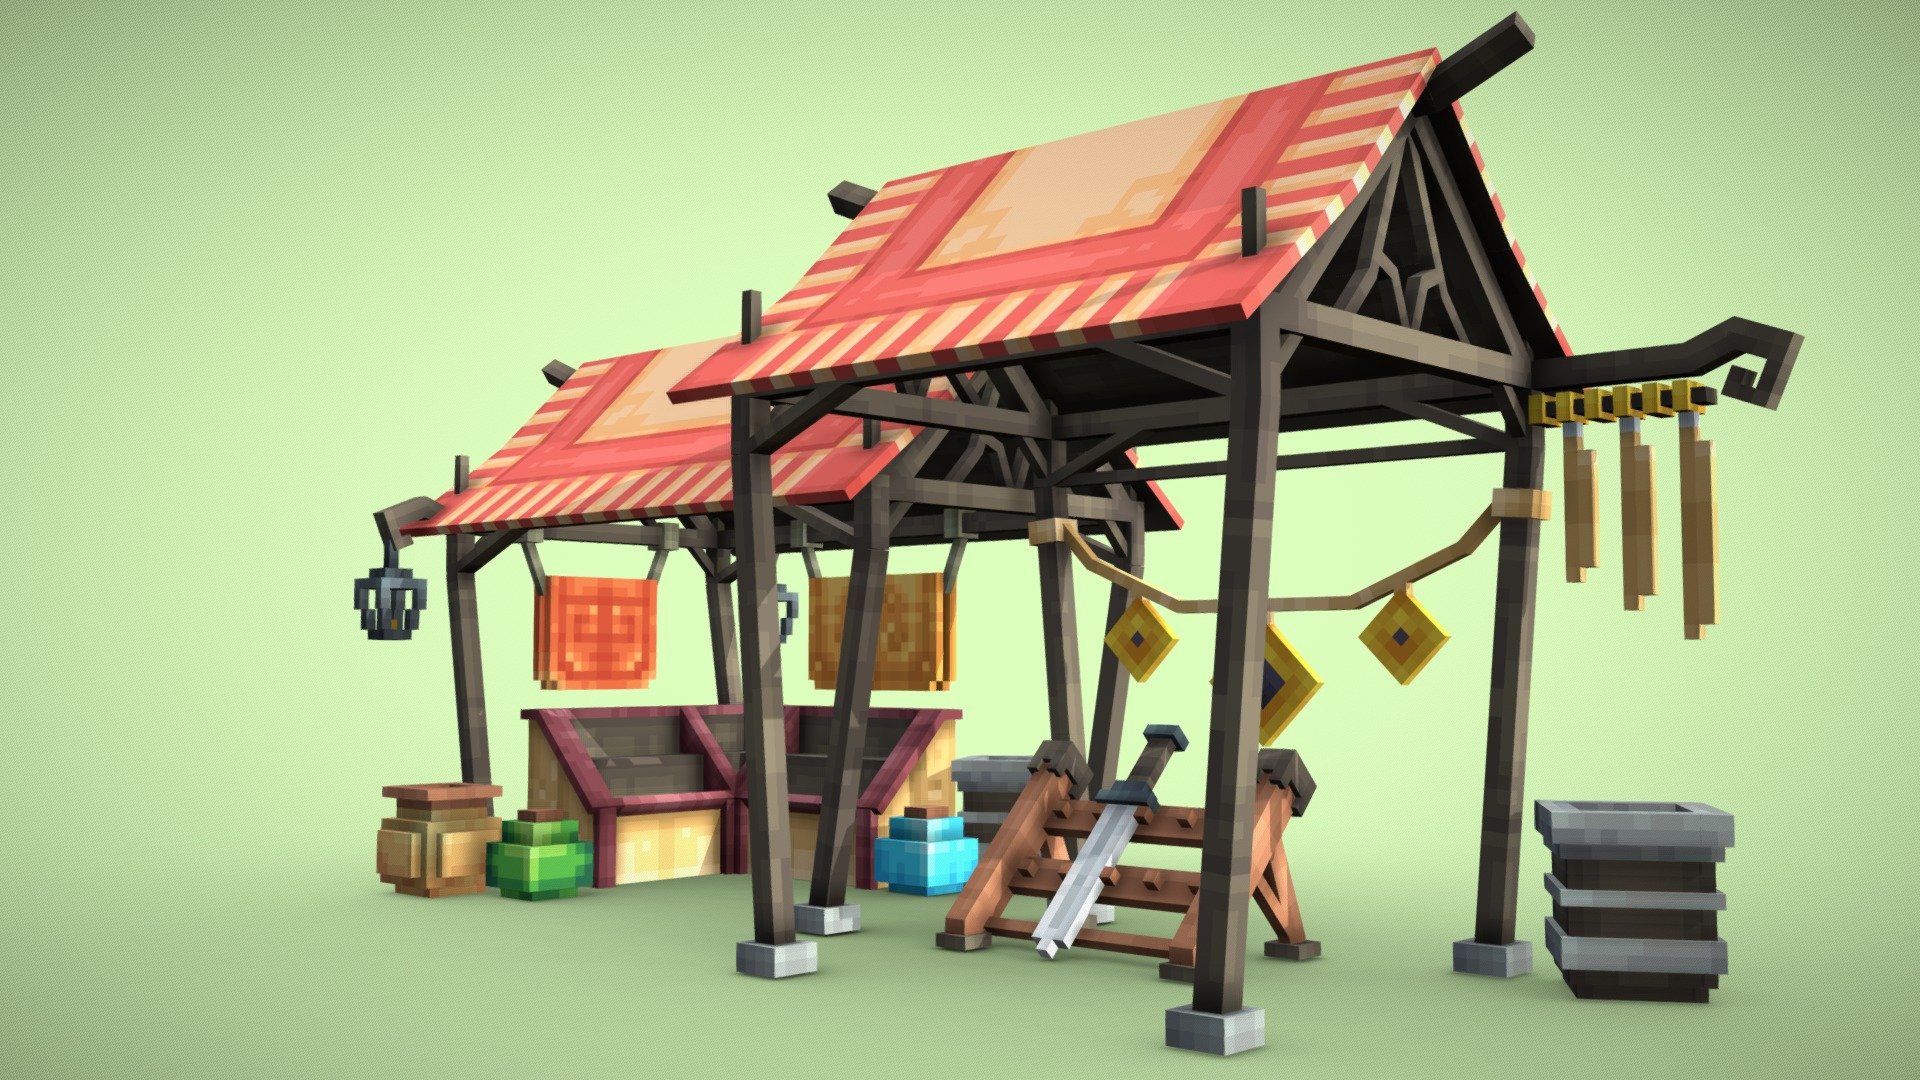 Oriental market stall made for a minecraft server update trailer!
Made for Modelbench with the relevant restrictions 3d model